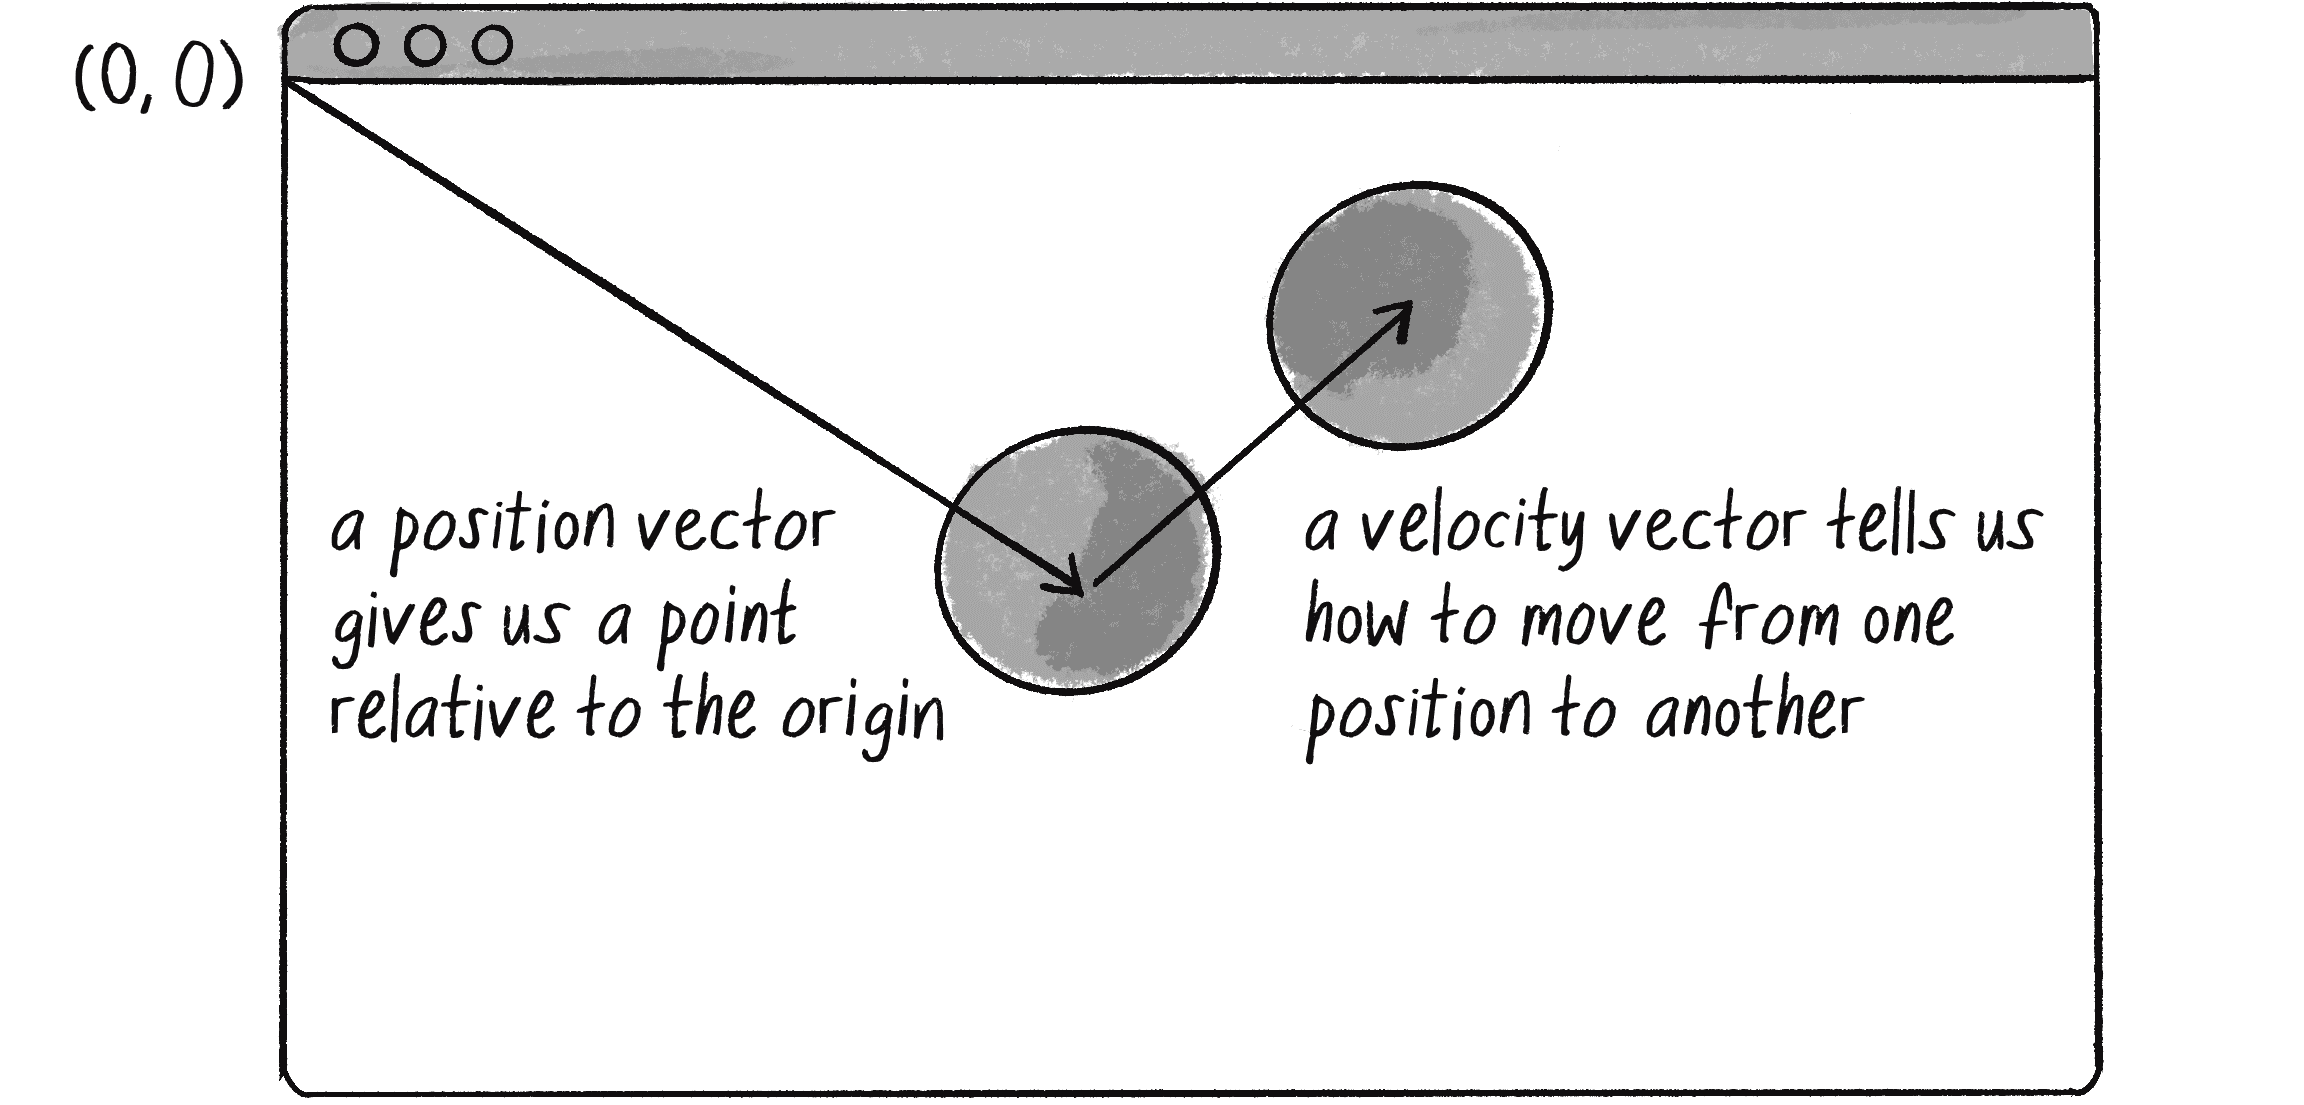 Figure 1.4: A computer graphics window with (0, 0) in the top left, showing a position vector and a velocity vector